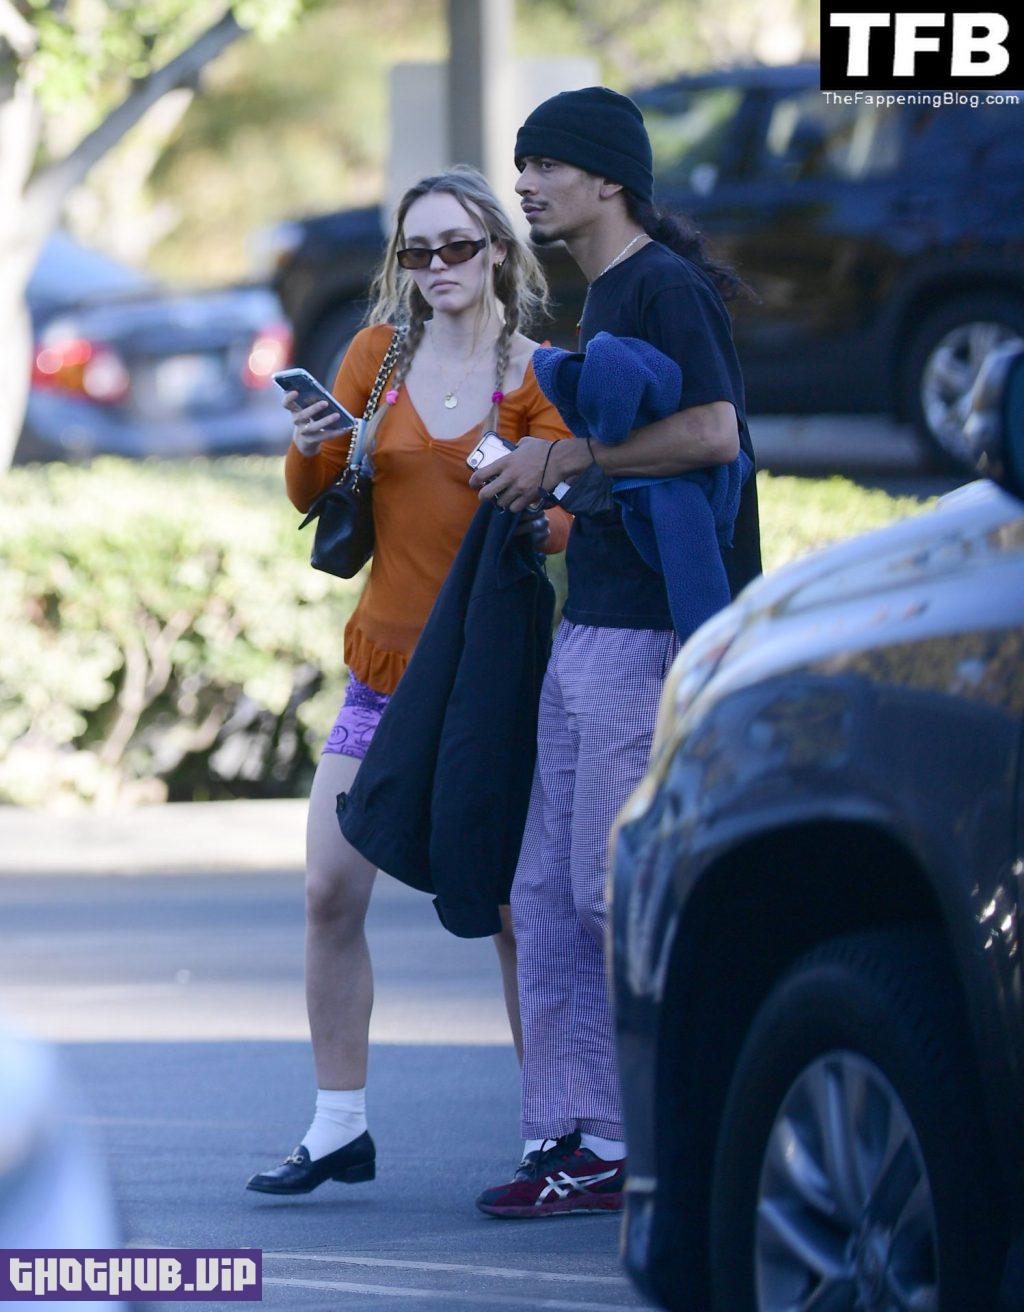 Lily Rose Depp Braless The Fappening Blog 17